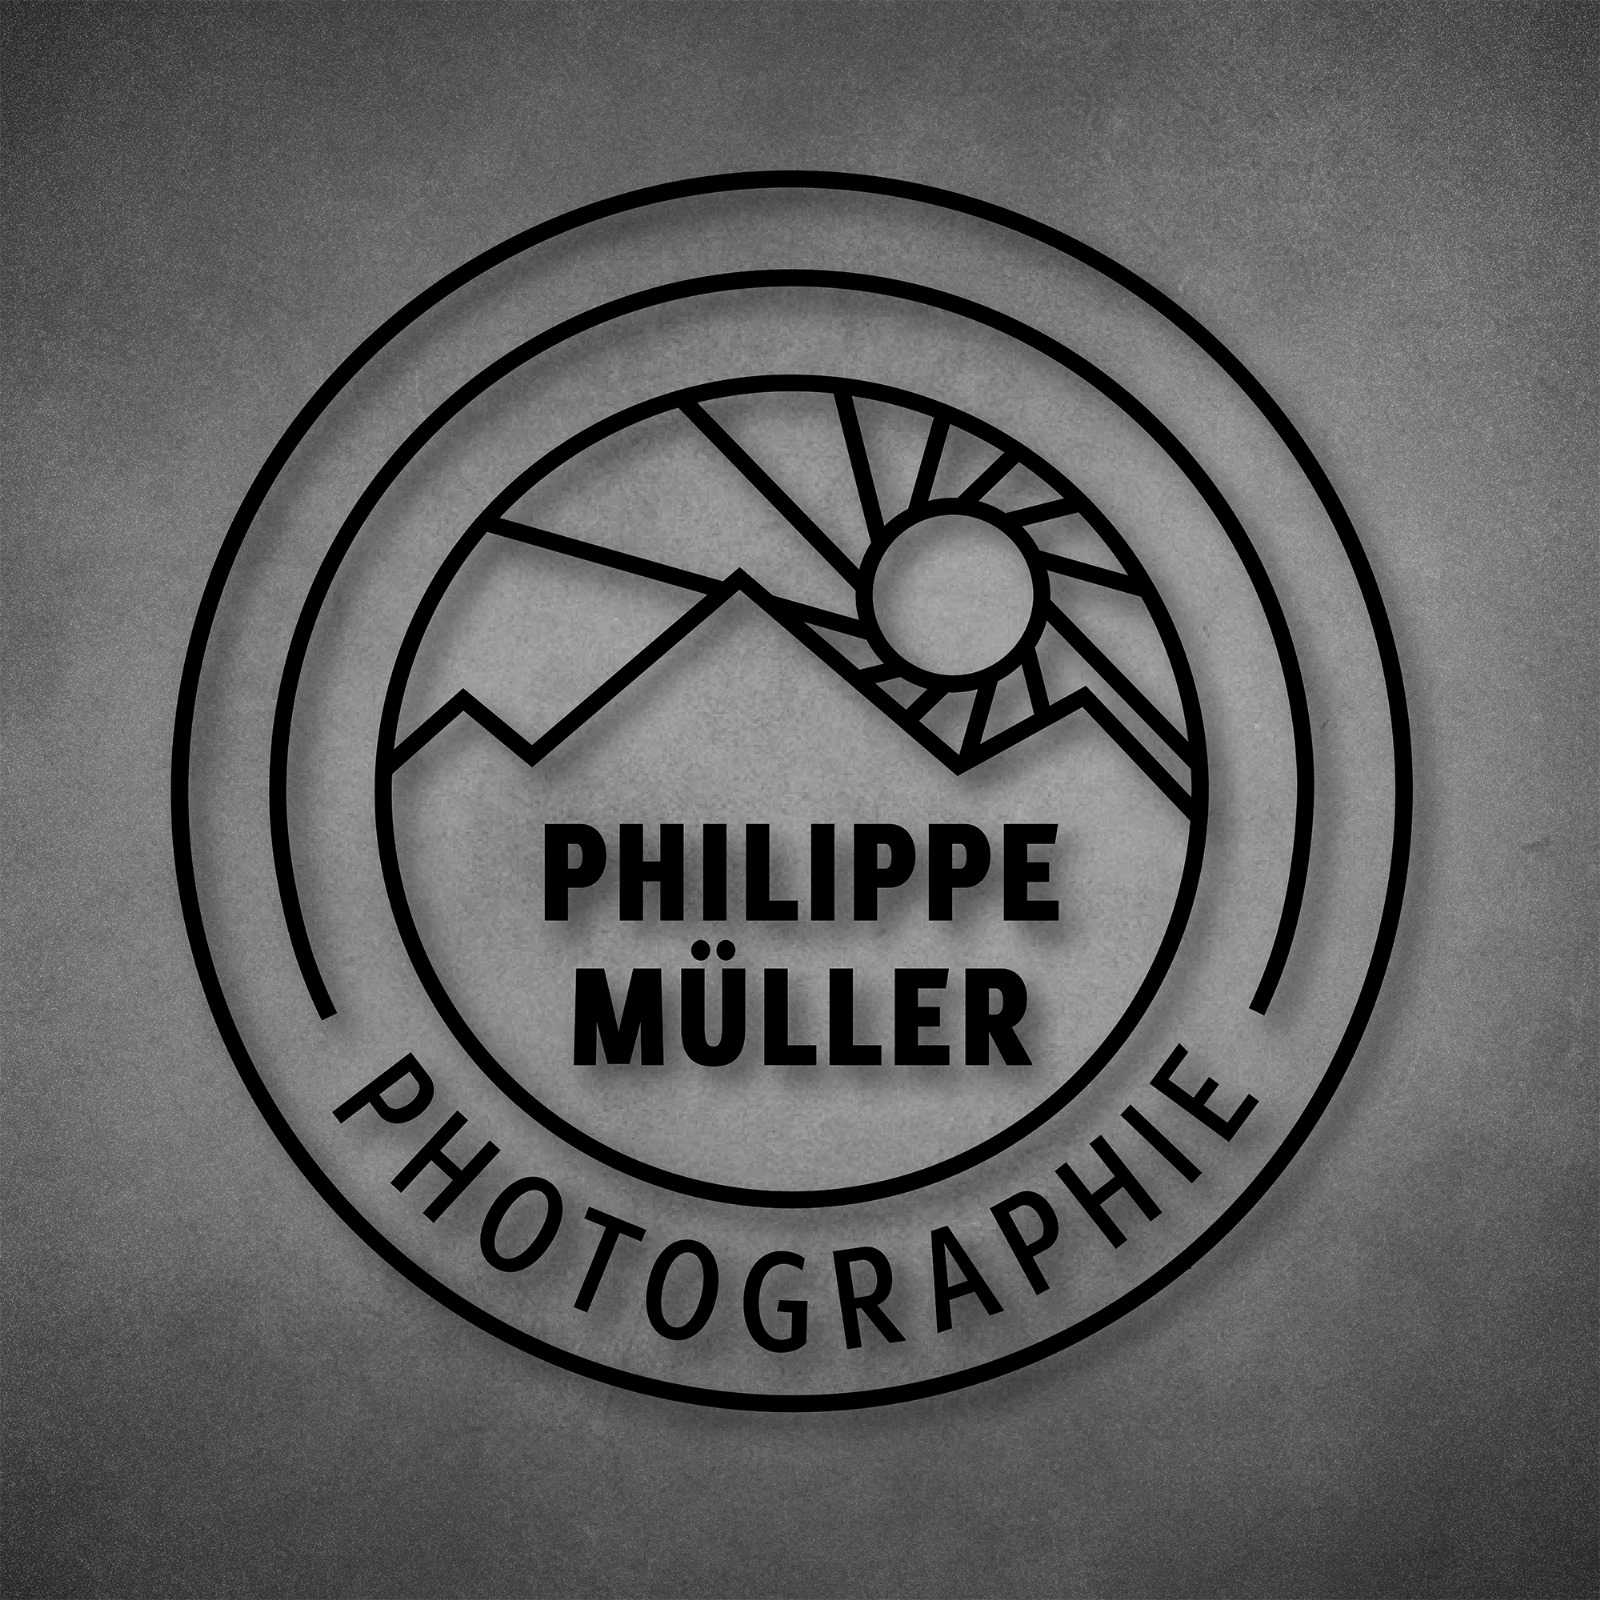 Philippe Müller Photographie